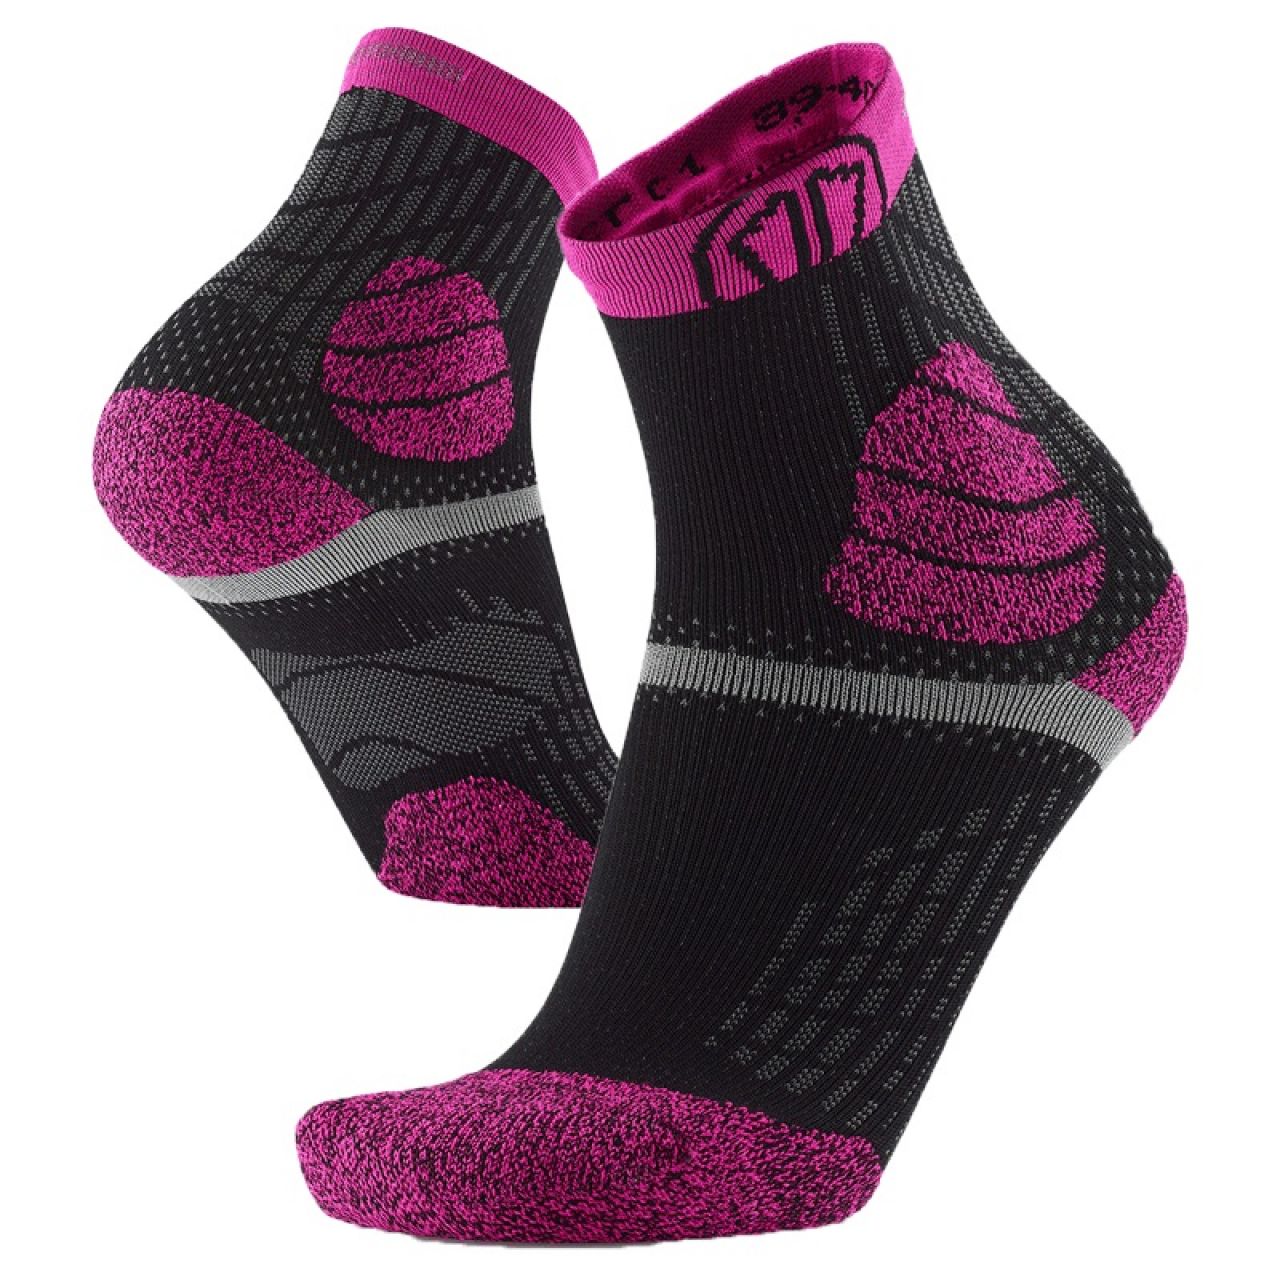 SIDAS CHAUSSETTES TRAIL PROTECT BLACK PINK Chaussettes de running